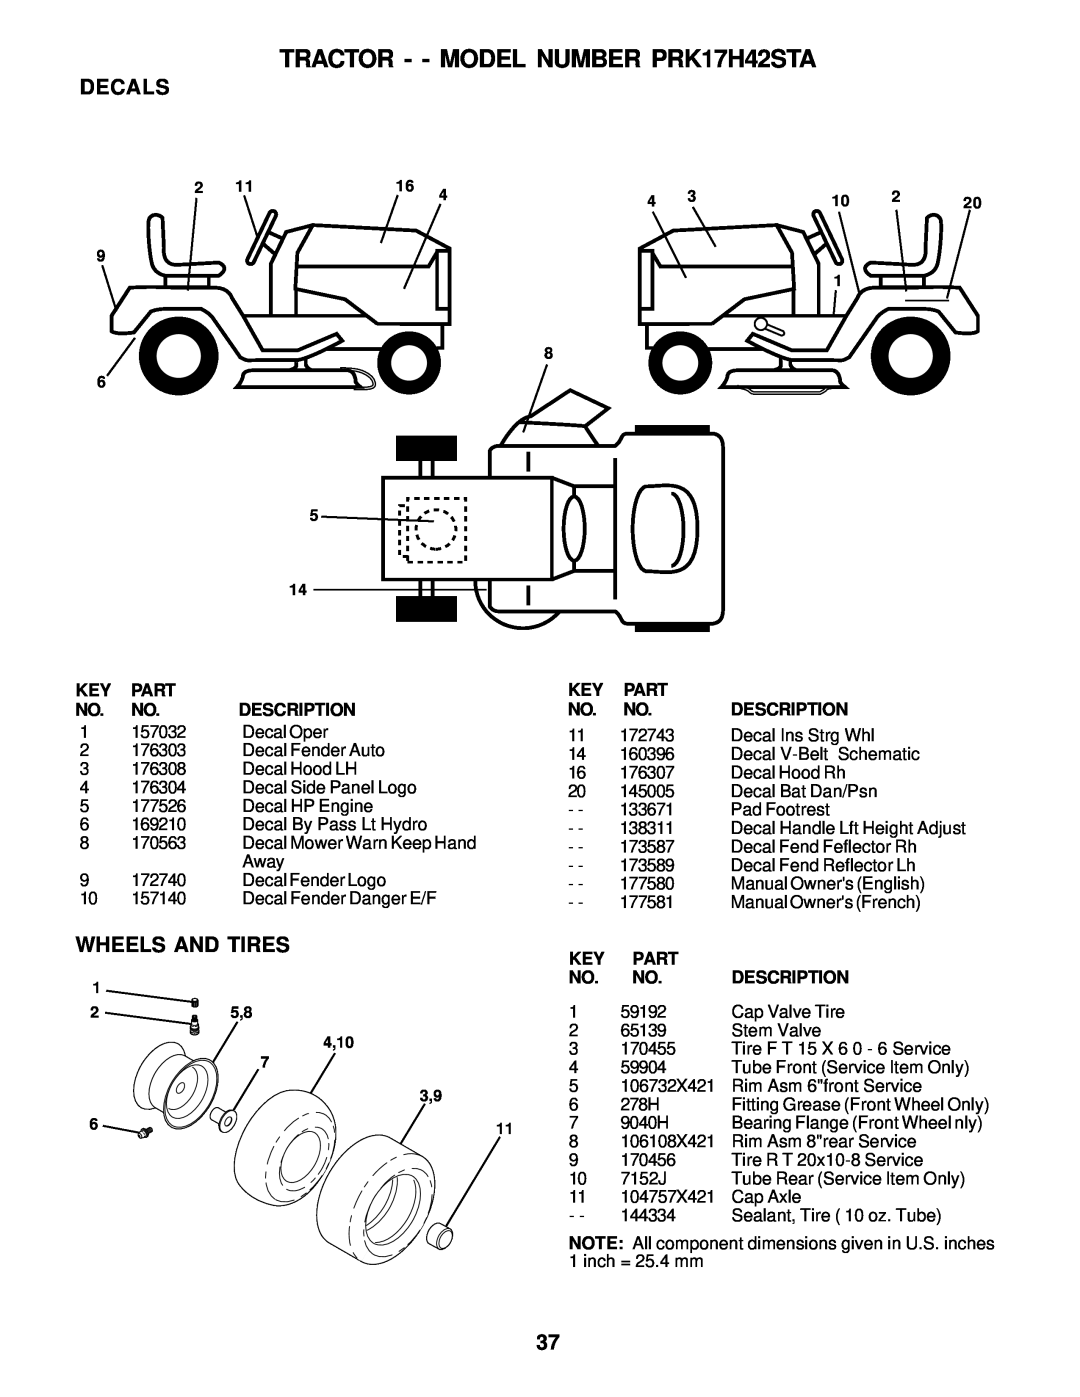 Poulan owner manual Decals, Wheels And Tires, TRACTOR - - MODEL NUMBER PRK17H42STA, Part, 4,10 